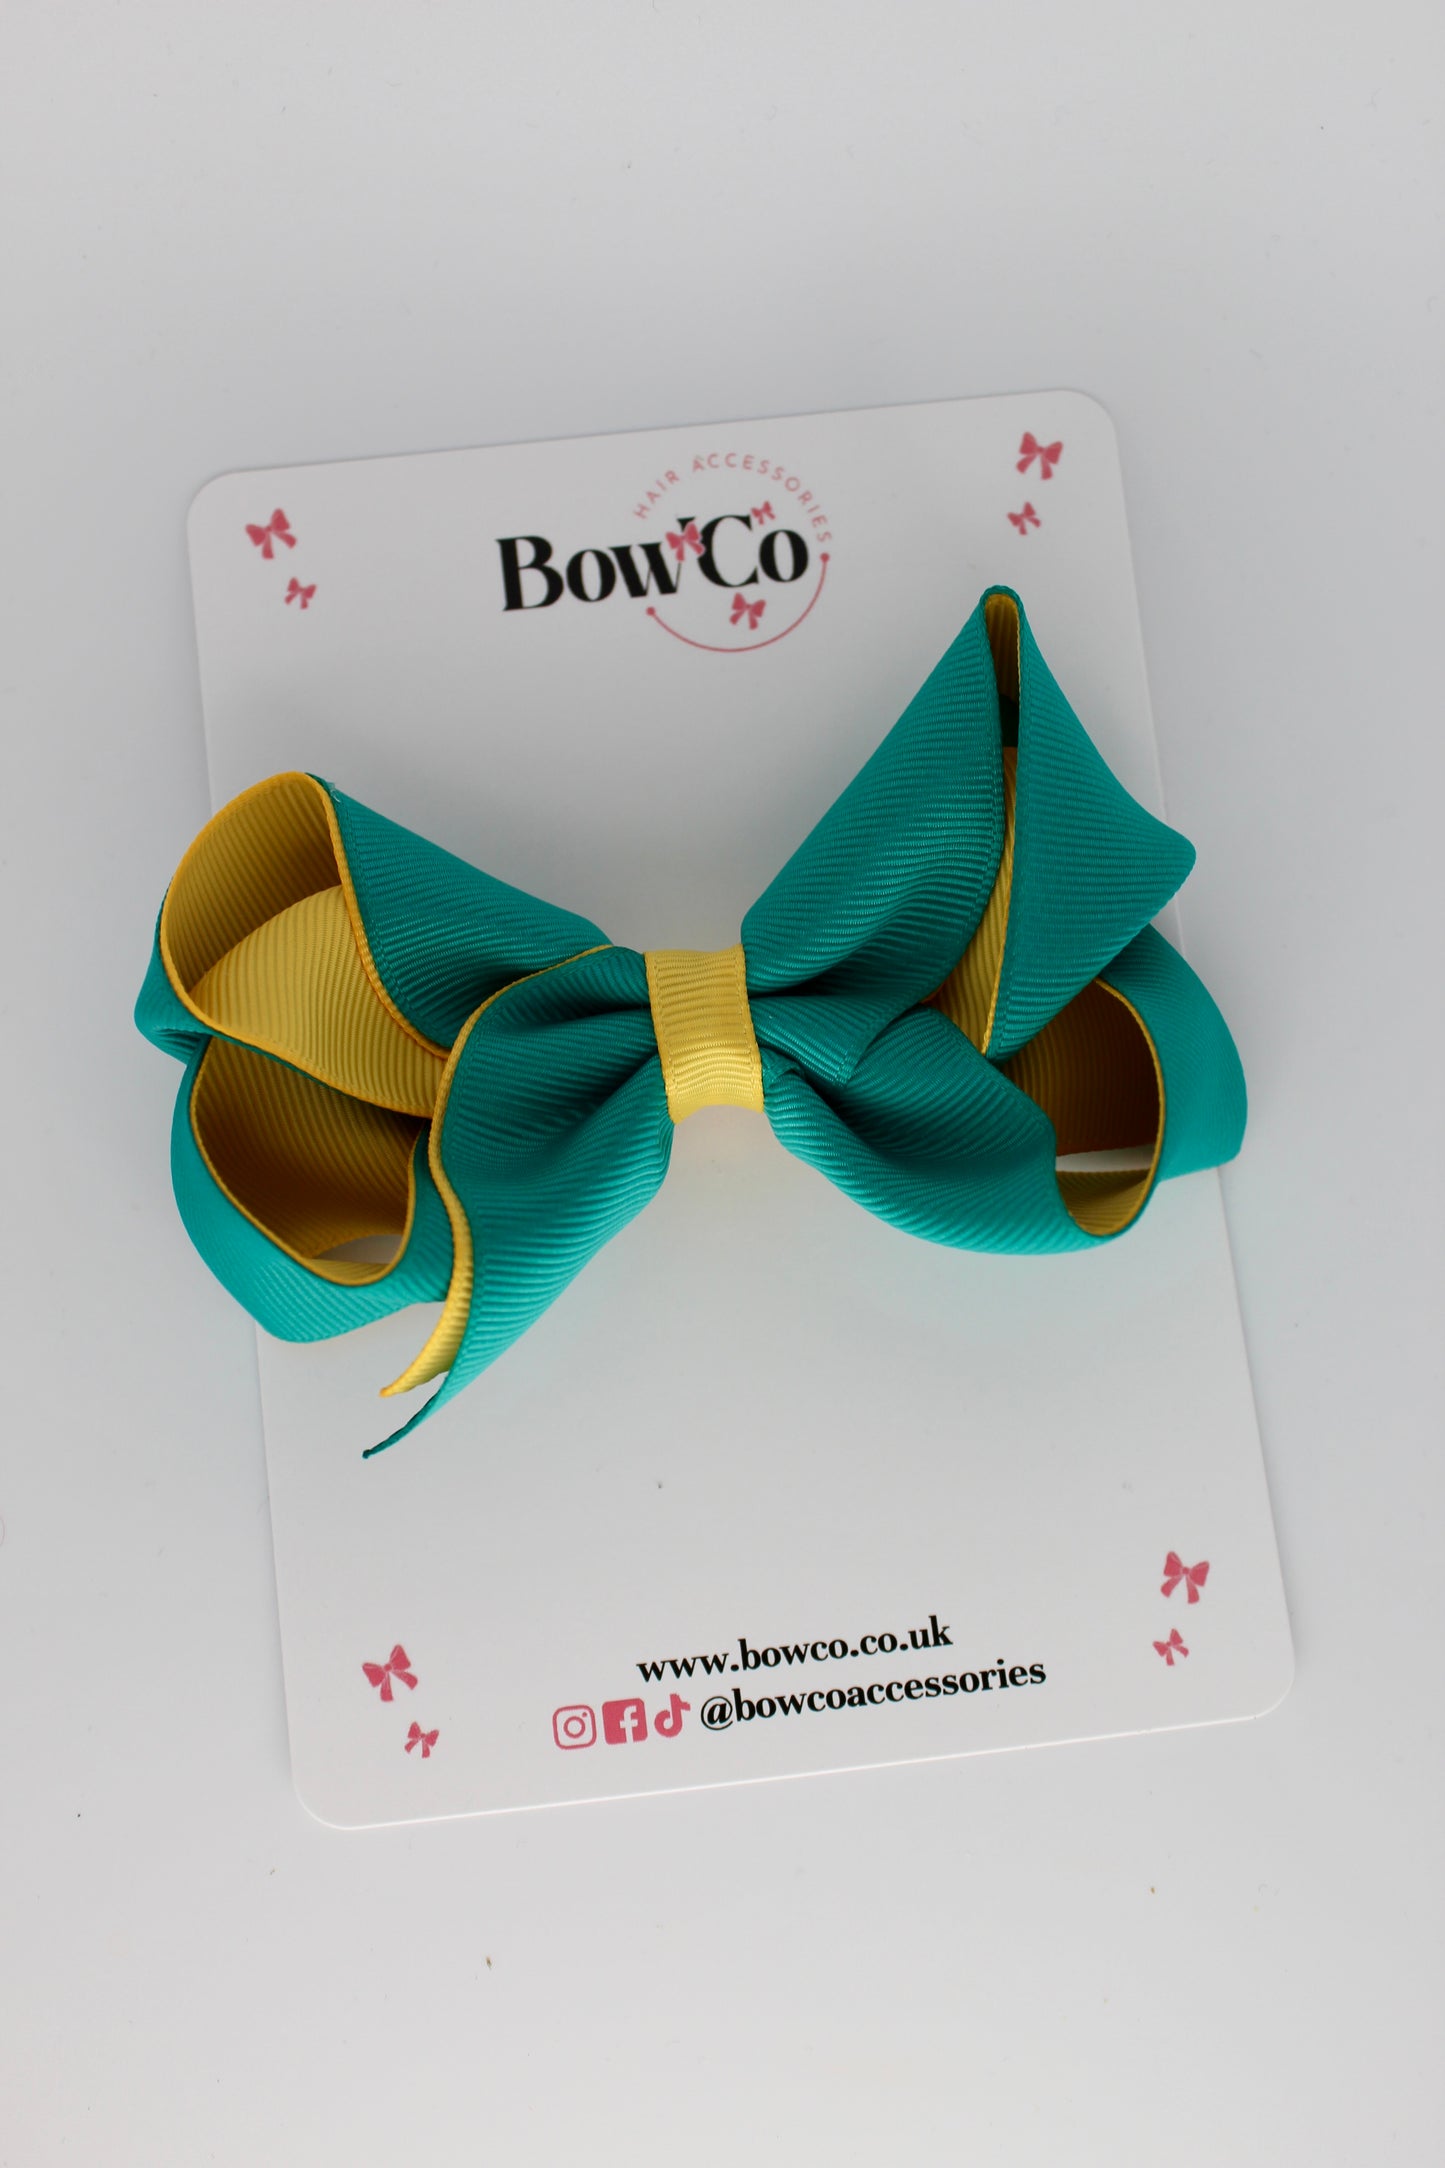 4 Inch Loop Bow - Clip - Jade Green and Yellow Gold